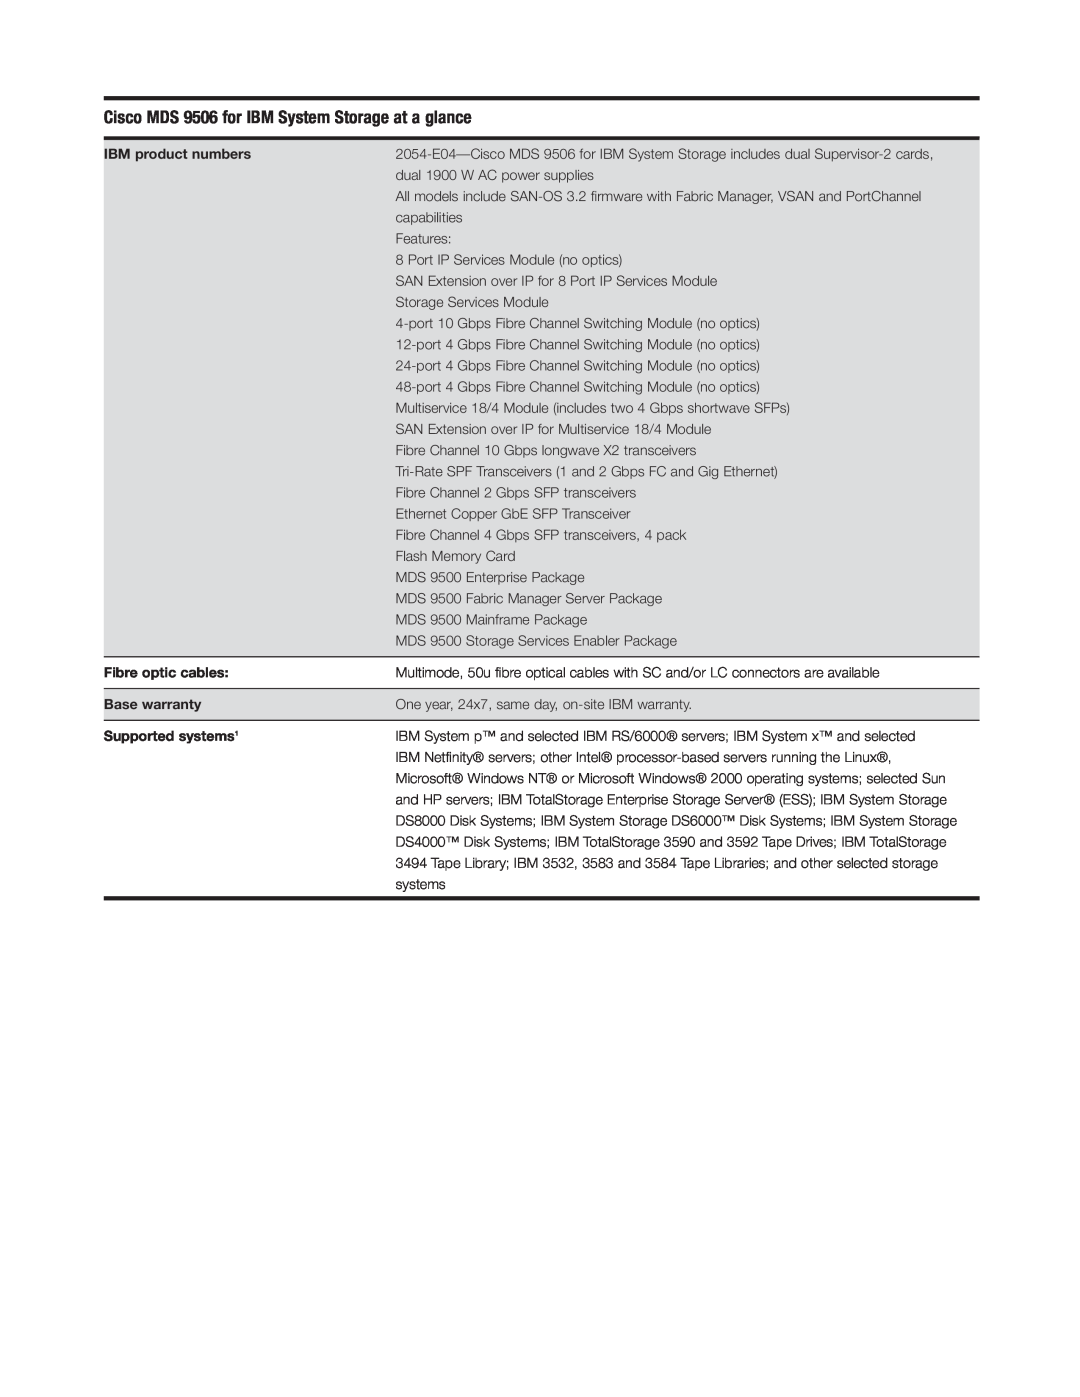 IBM manual Cisco MDS 9506 for IBM System Storage at a glance, IBM product numbers, Fibre optic cables, Base warranty 